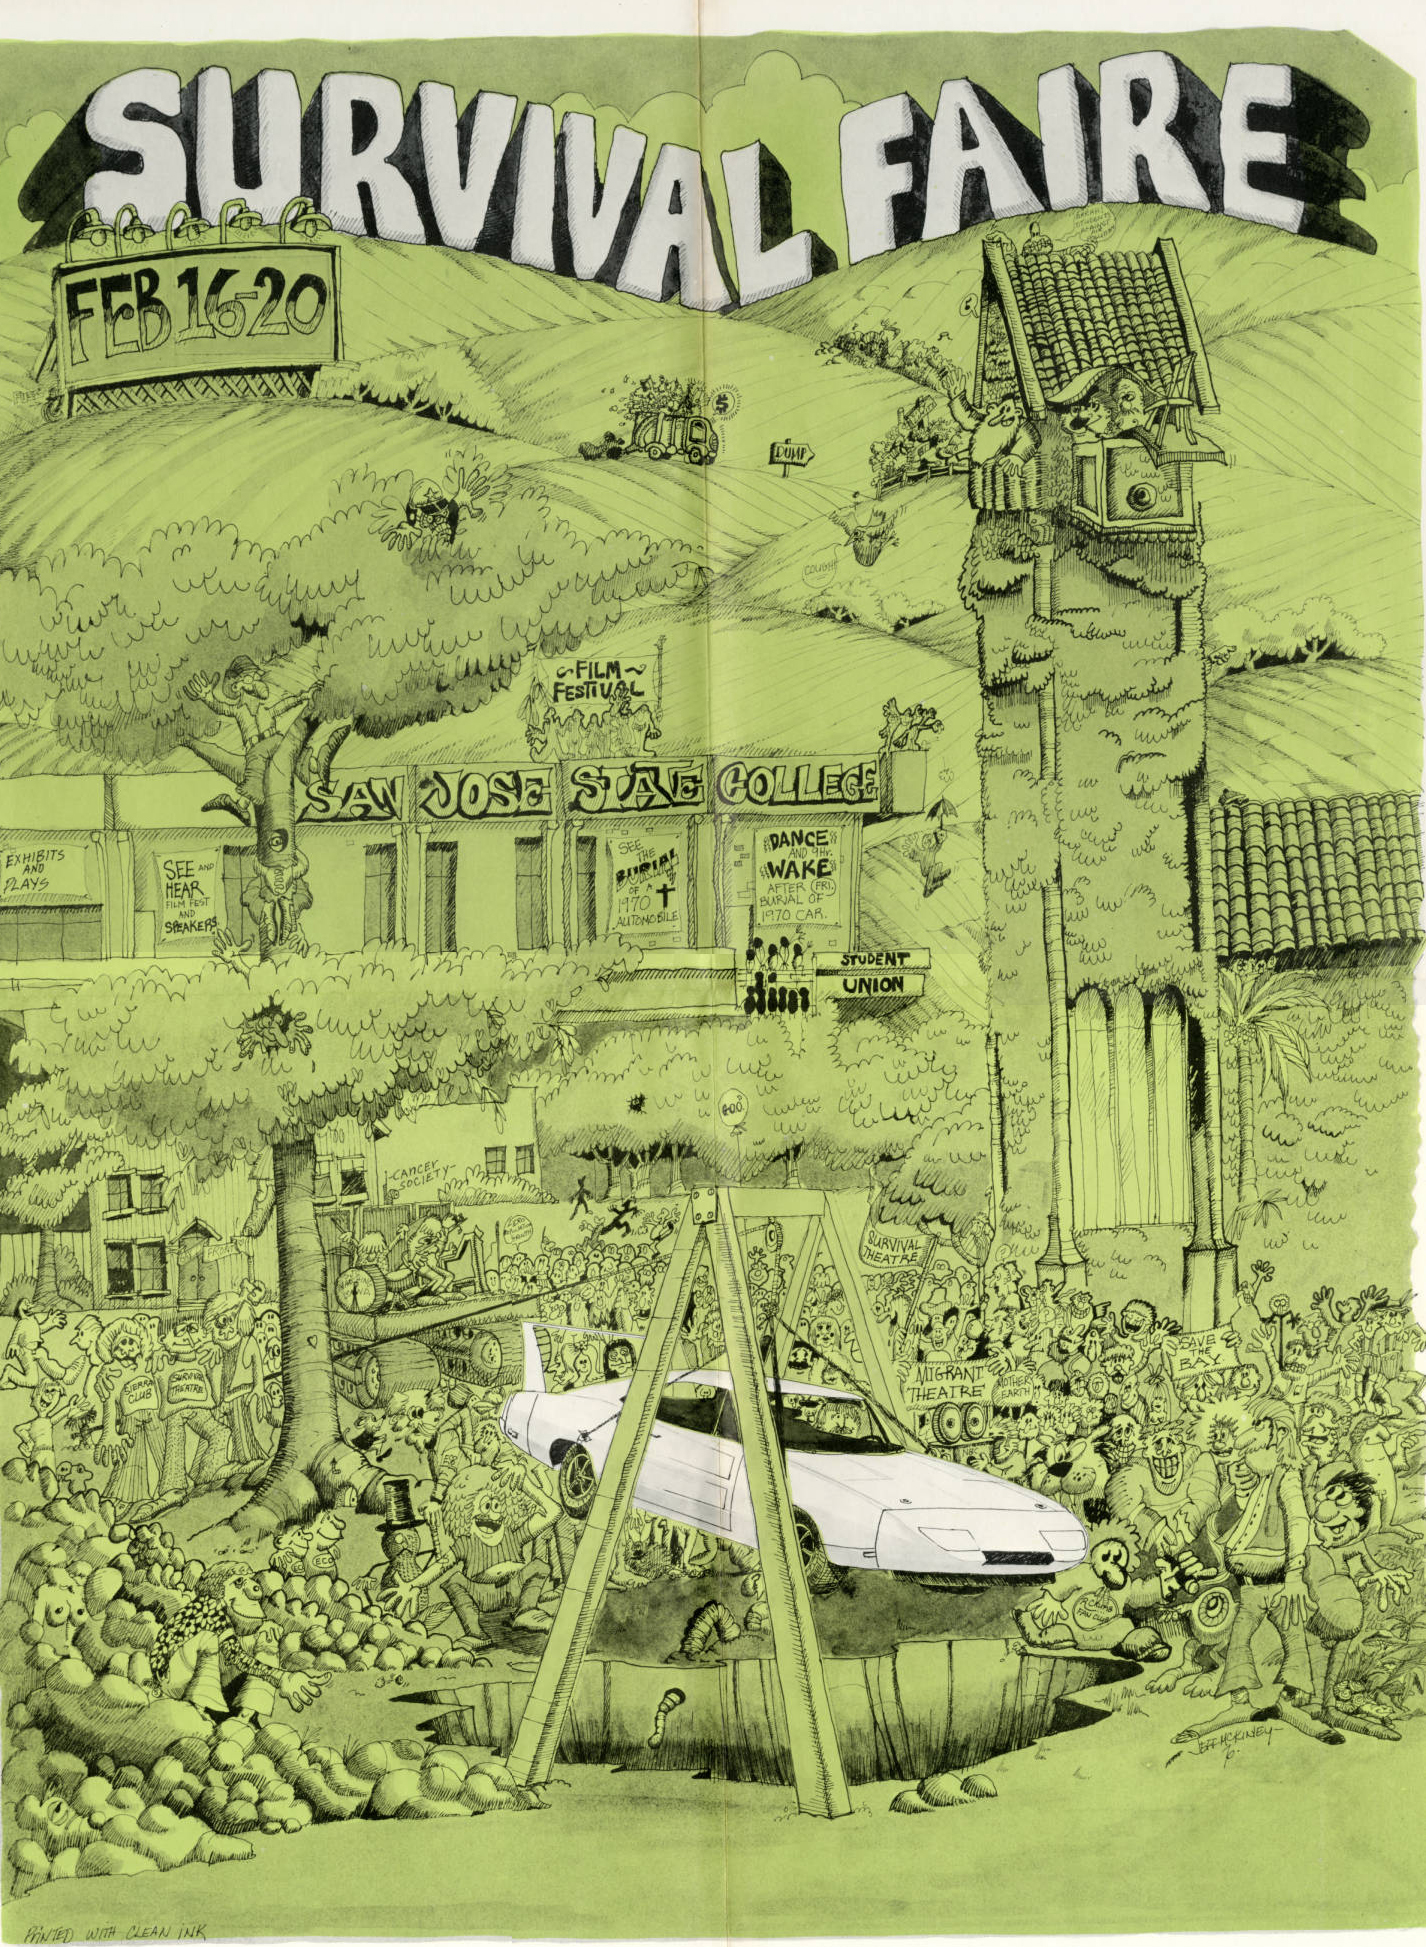 Poster from San Jose State University promoting the first Earth Day "Survival Faire" in Feb. 1970